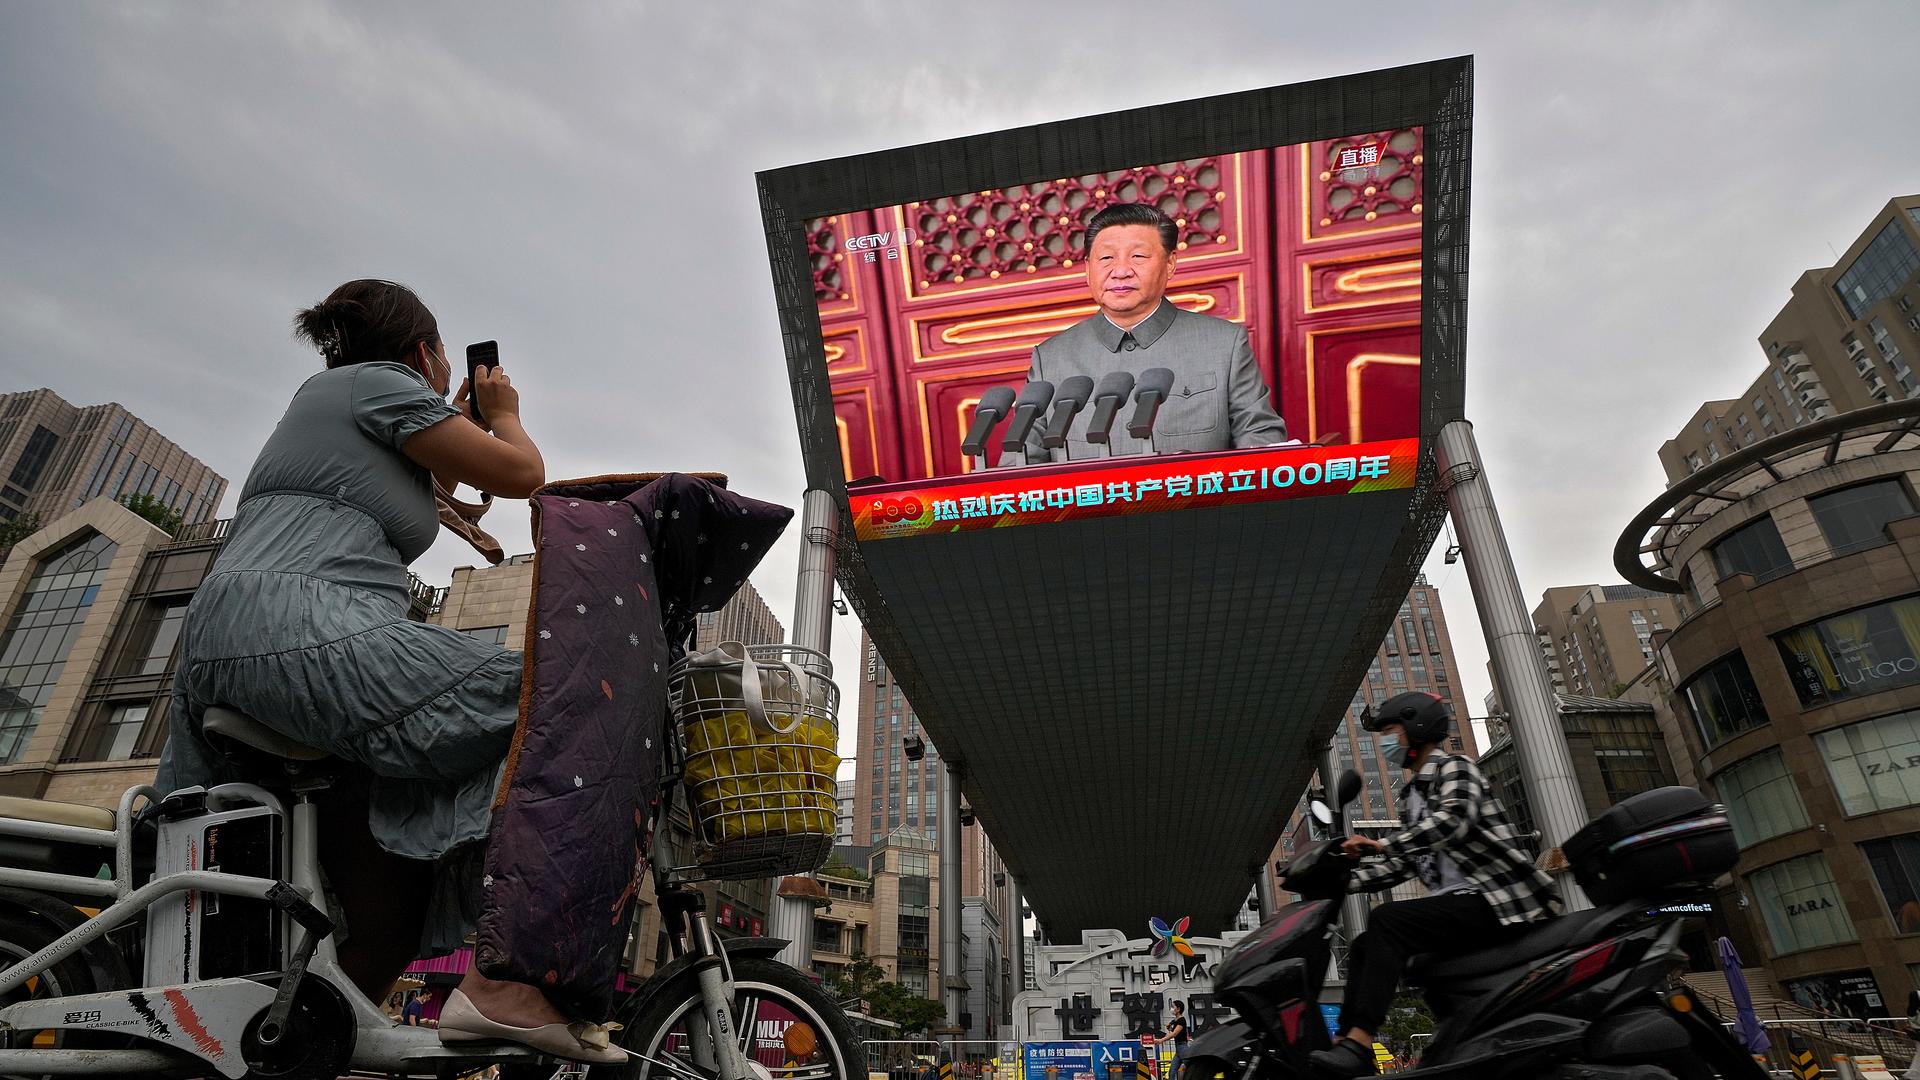 A woman on her electric-powered scooter films a large video screen outside a shopping mall showing Chinese President Xi Jinping speaking during an event to commemorate the 100th anniversary of China's Communist Party at Tiananmen Square in Beijing.